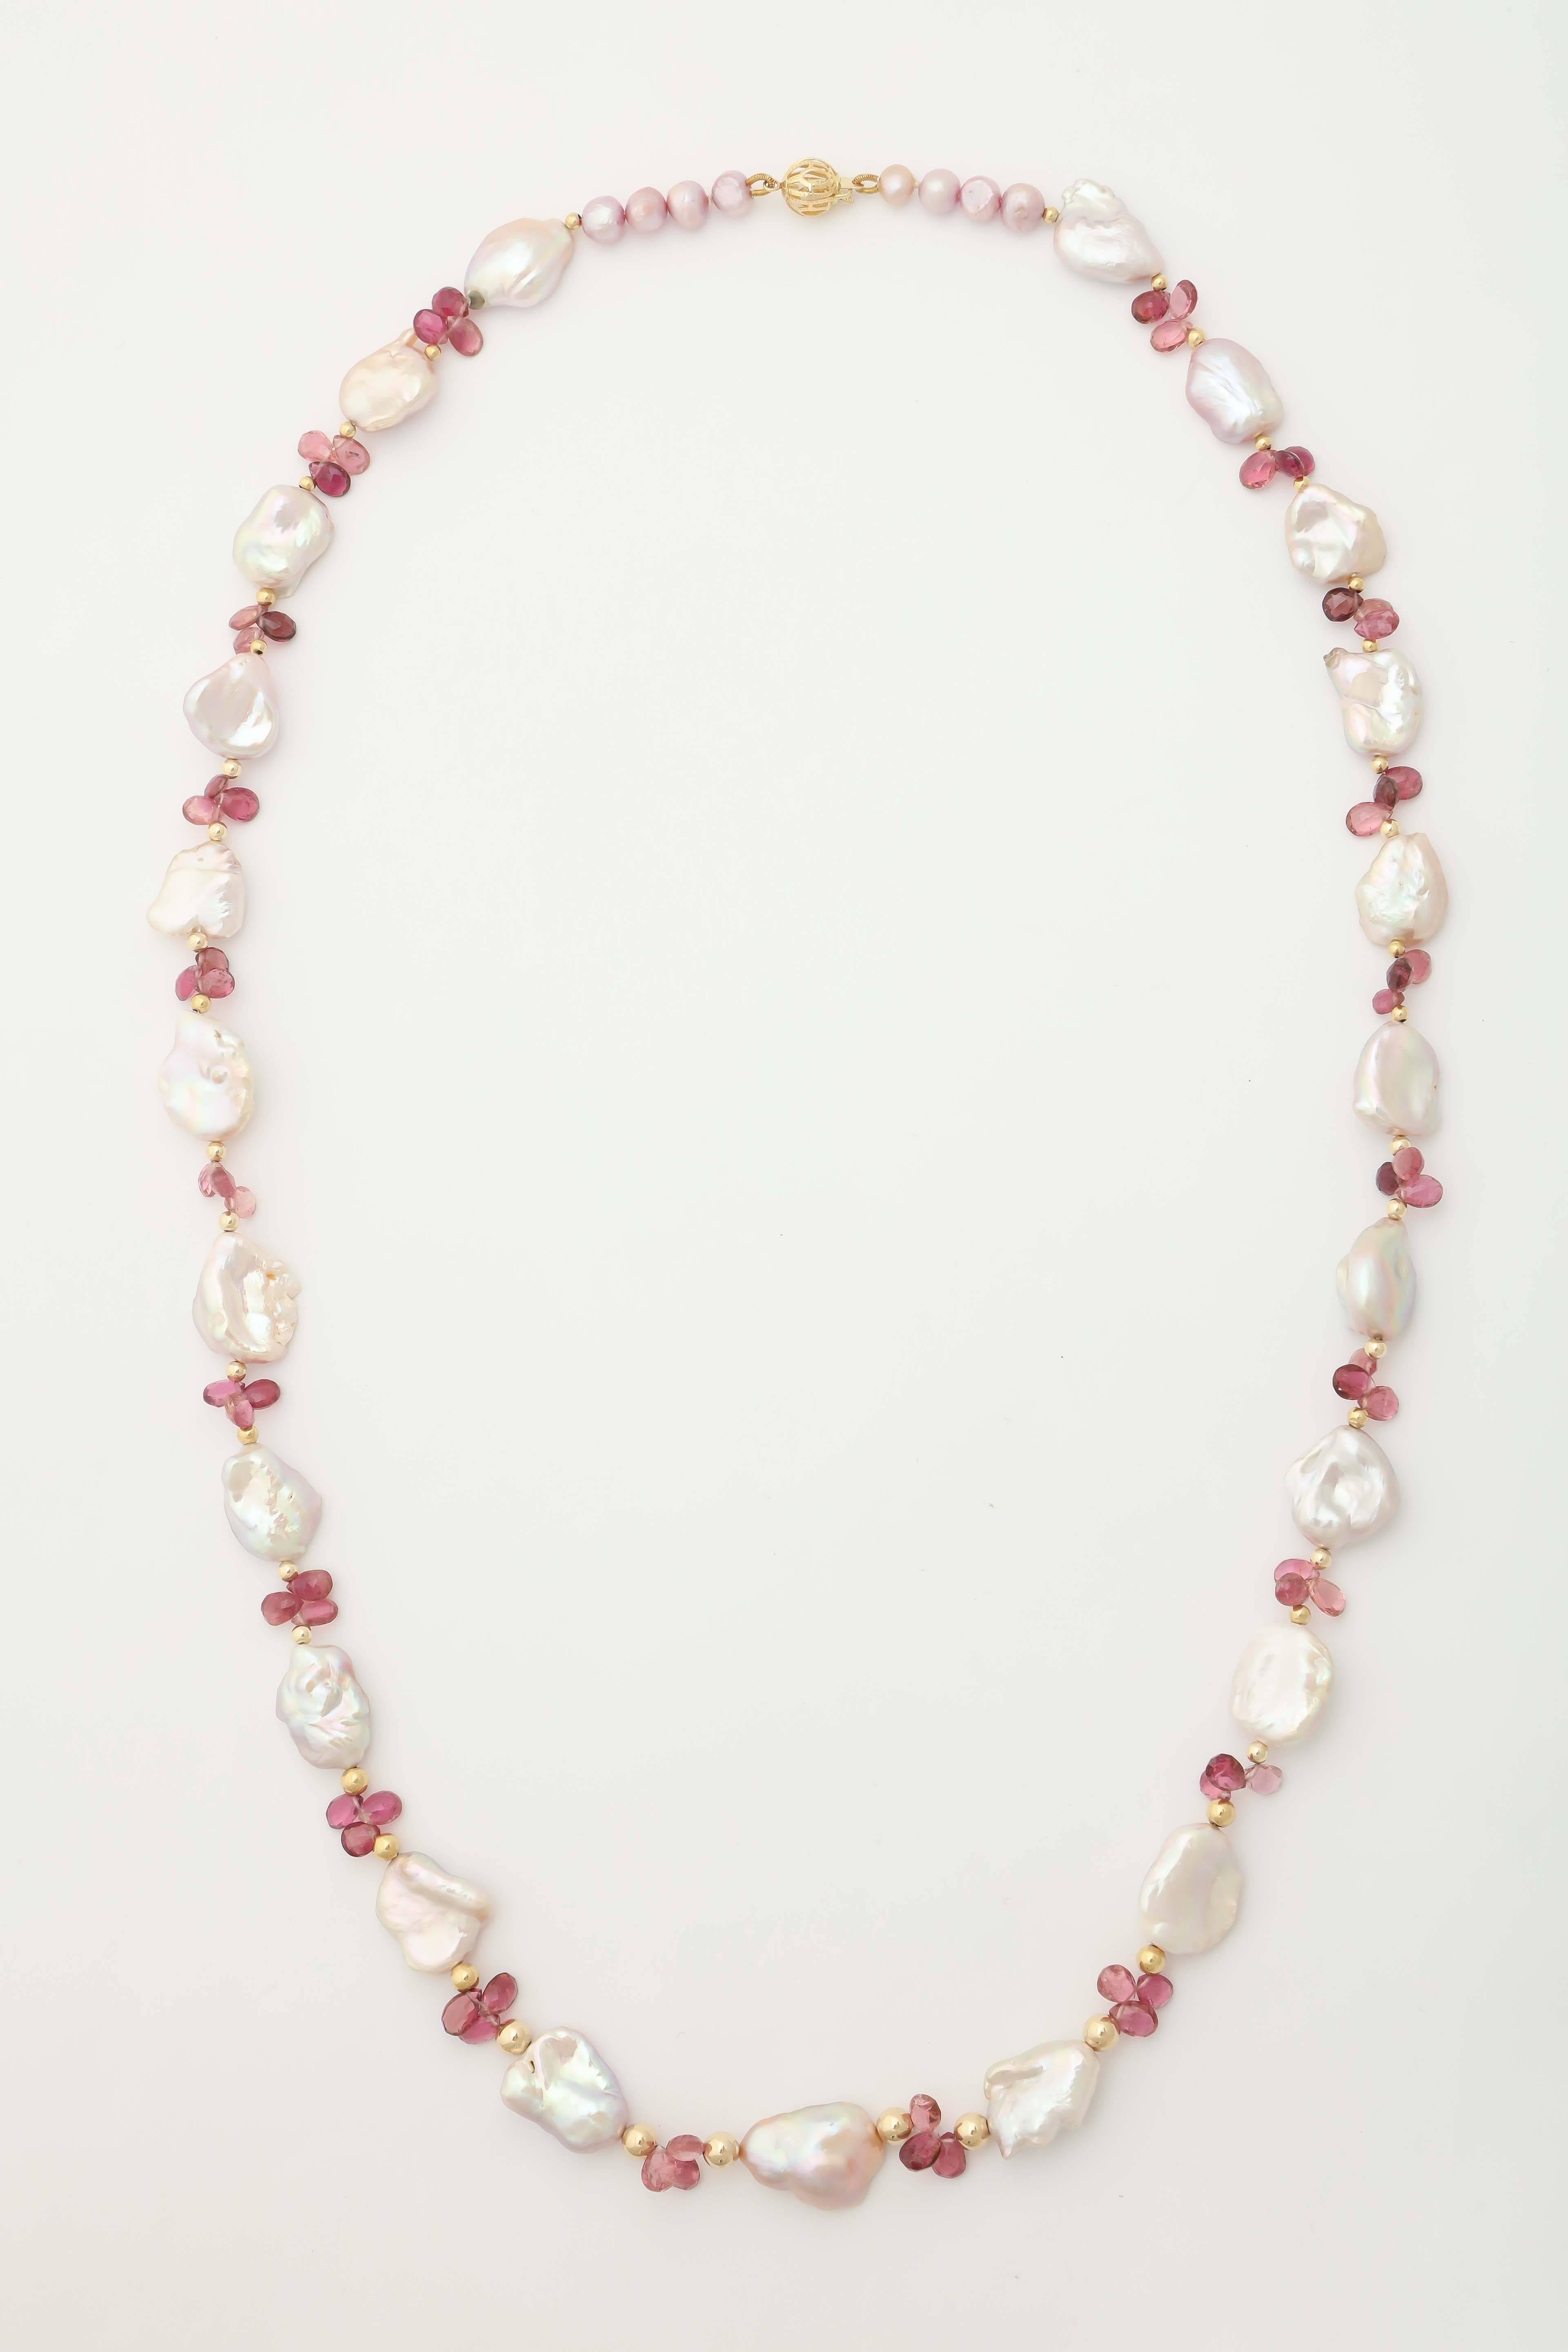 This pastel pink baroque fresh water pearl and pink tourmaline briolette necklace is 28 1/2 in. long. The gold balls separating the pearls are 14 kt gold and so is the filigree clasp. A great necklace with light and airy summer clothes. The pearls